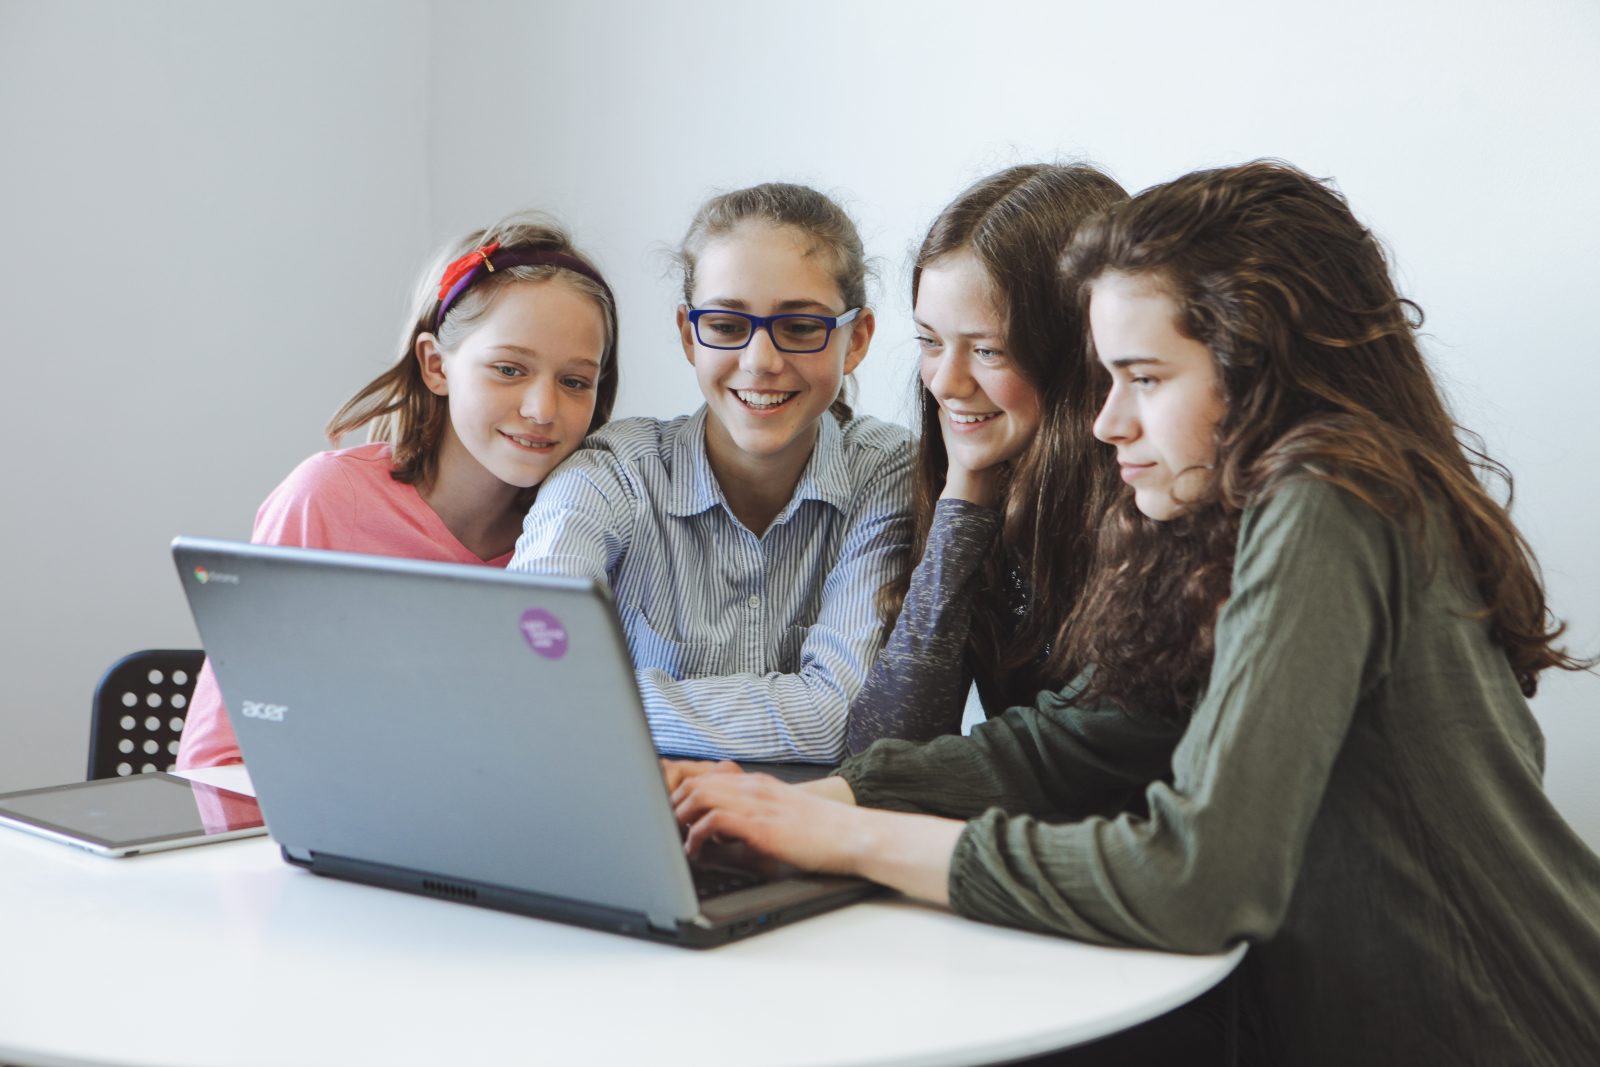 Girls learning code in Cornwall on May 11